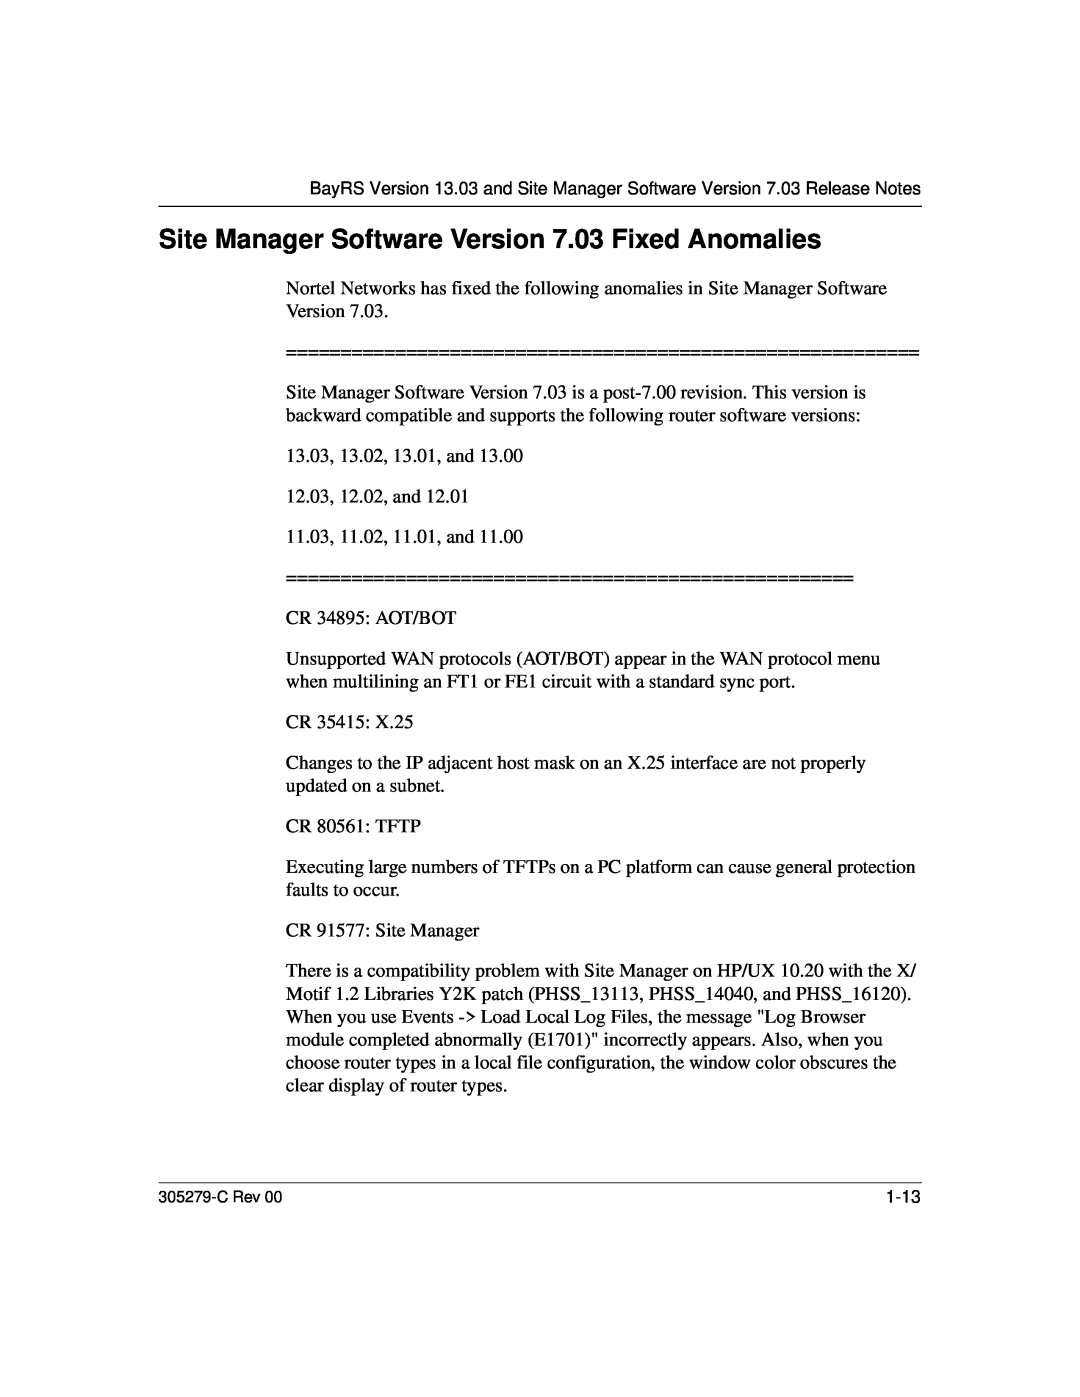 Nortel Networks 13.03 manual Site Manager Software Version 7.03 Fixed Anomalies 